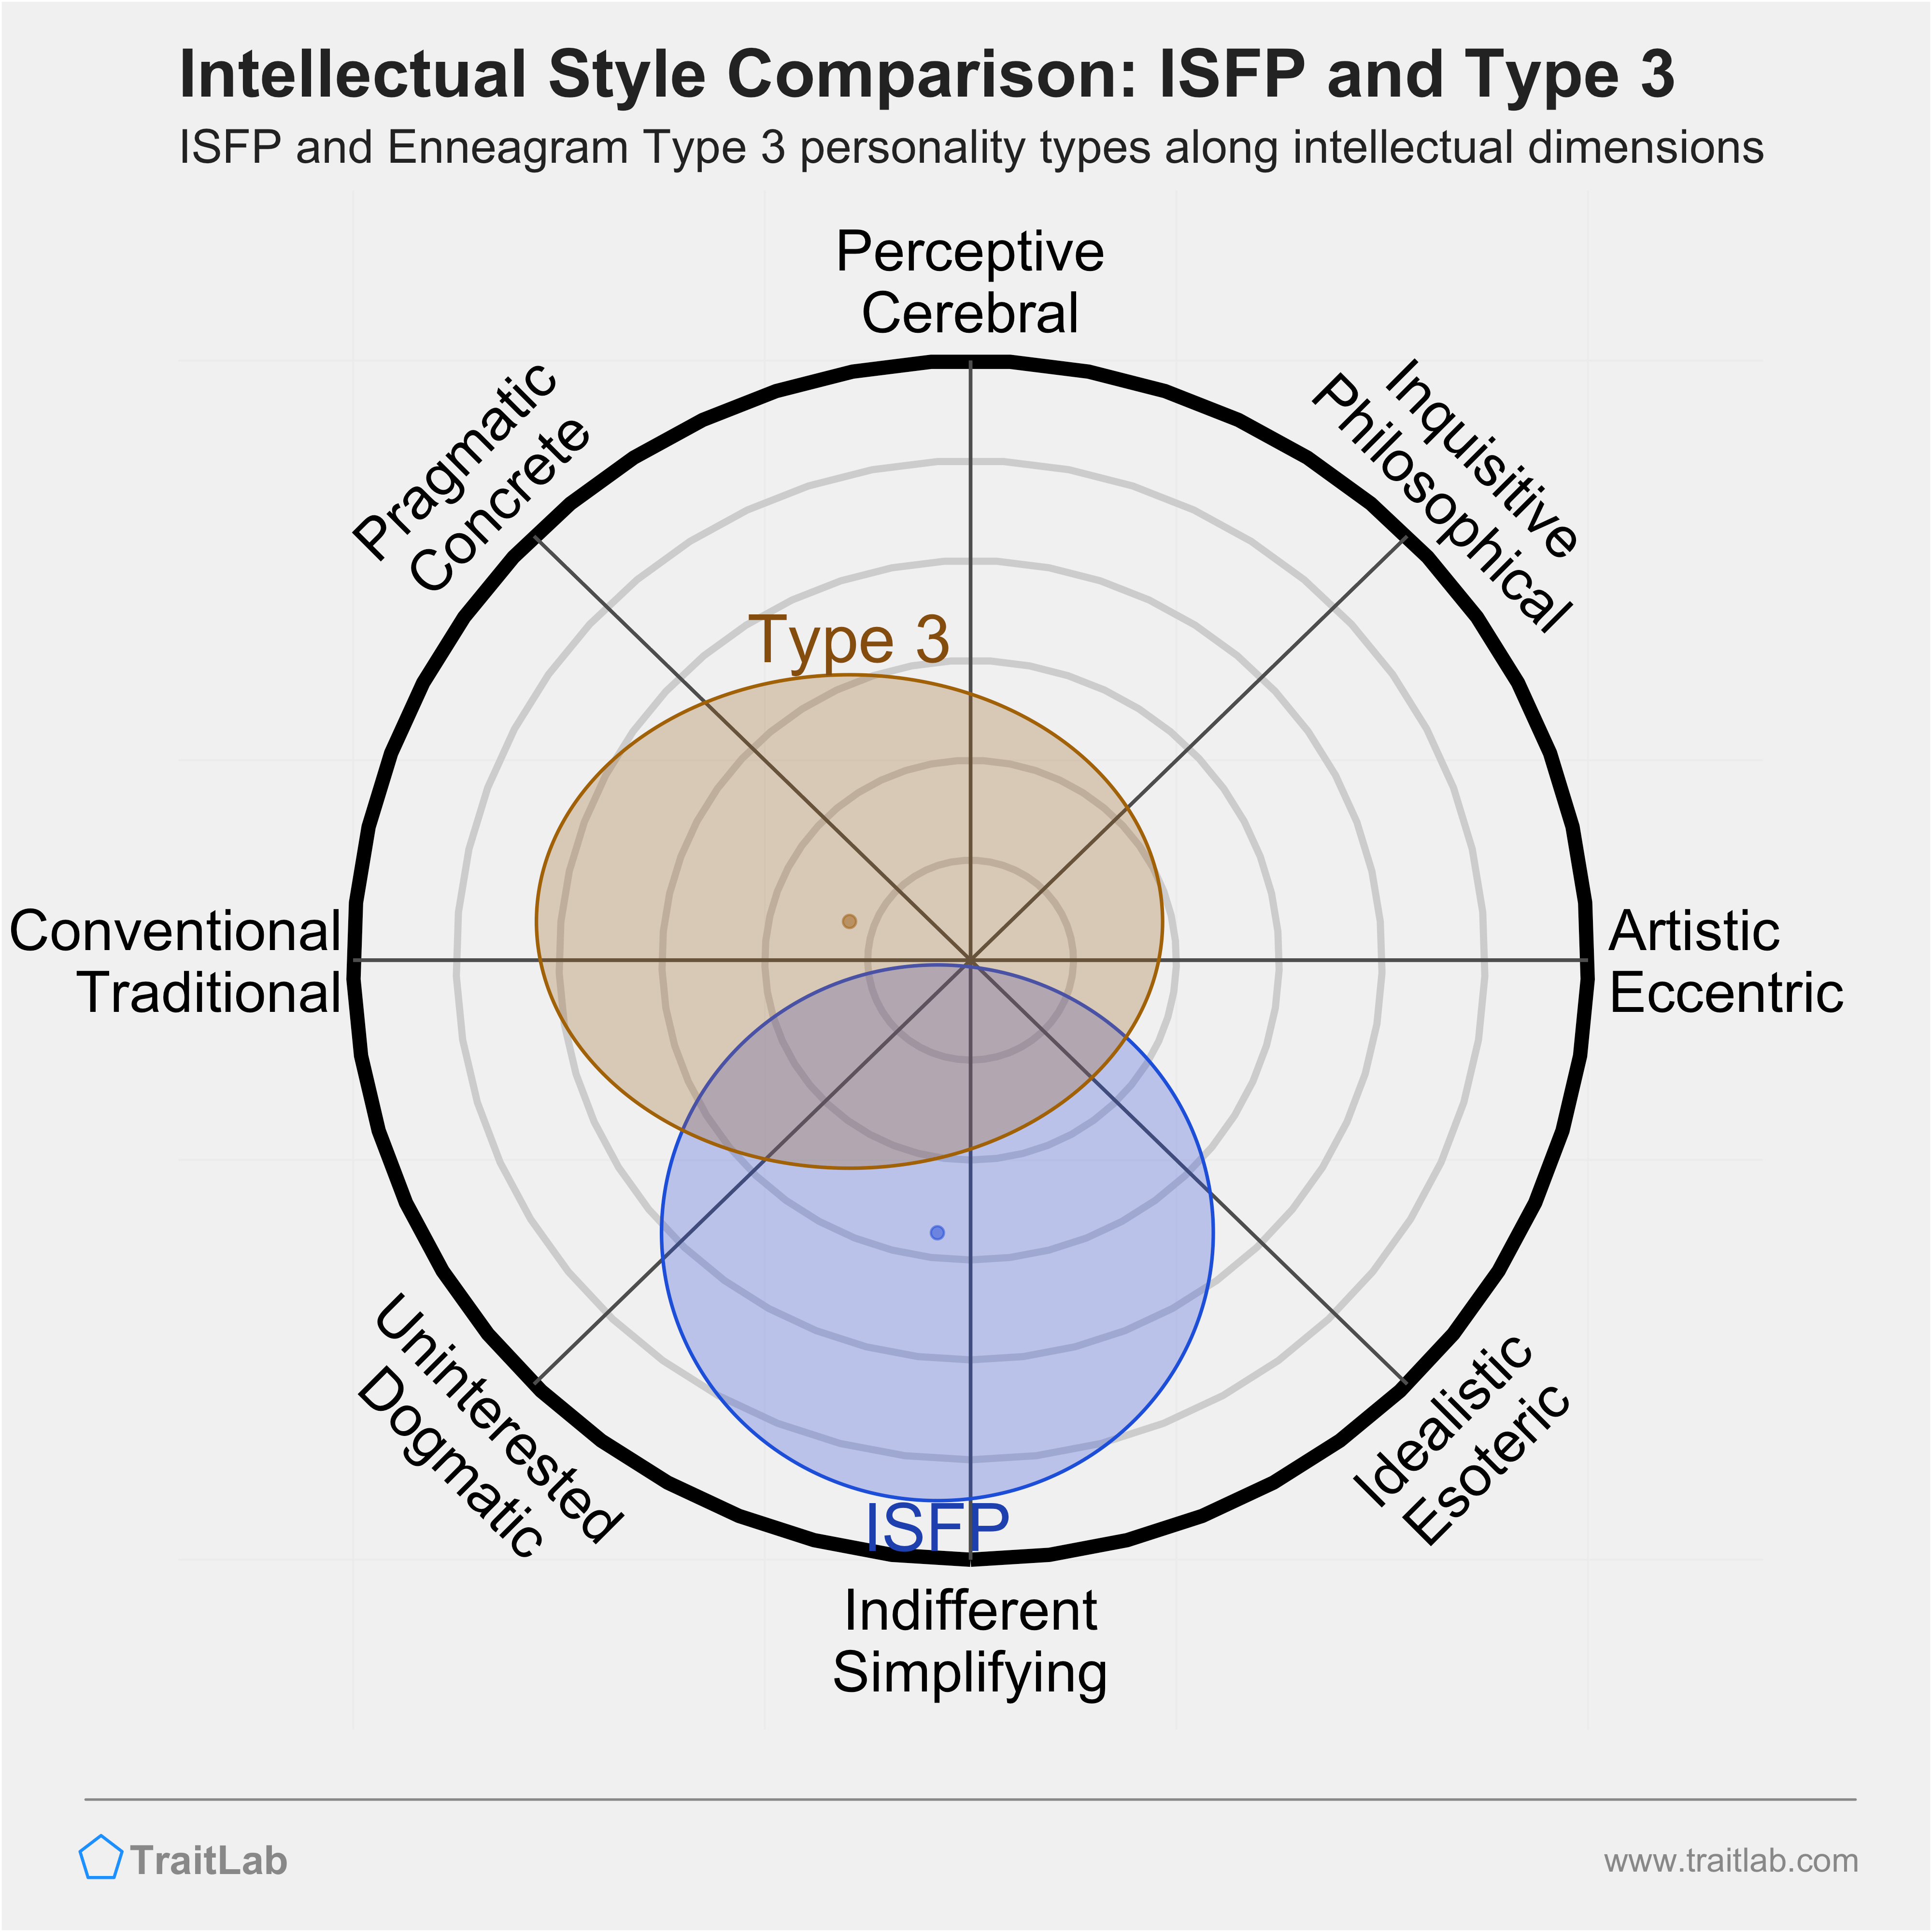 ISFP and Type 3 comparison across intellectual dimensions